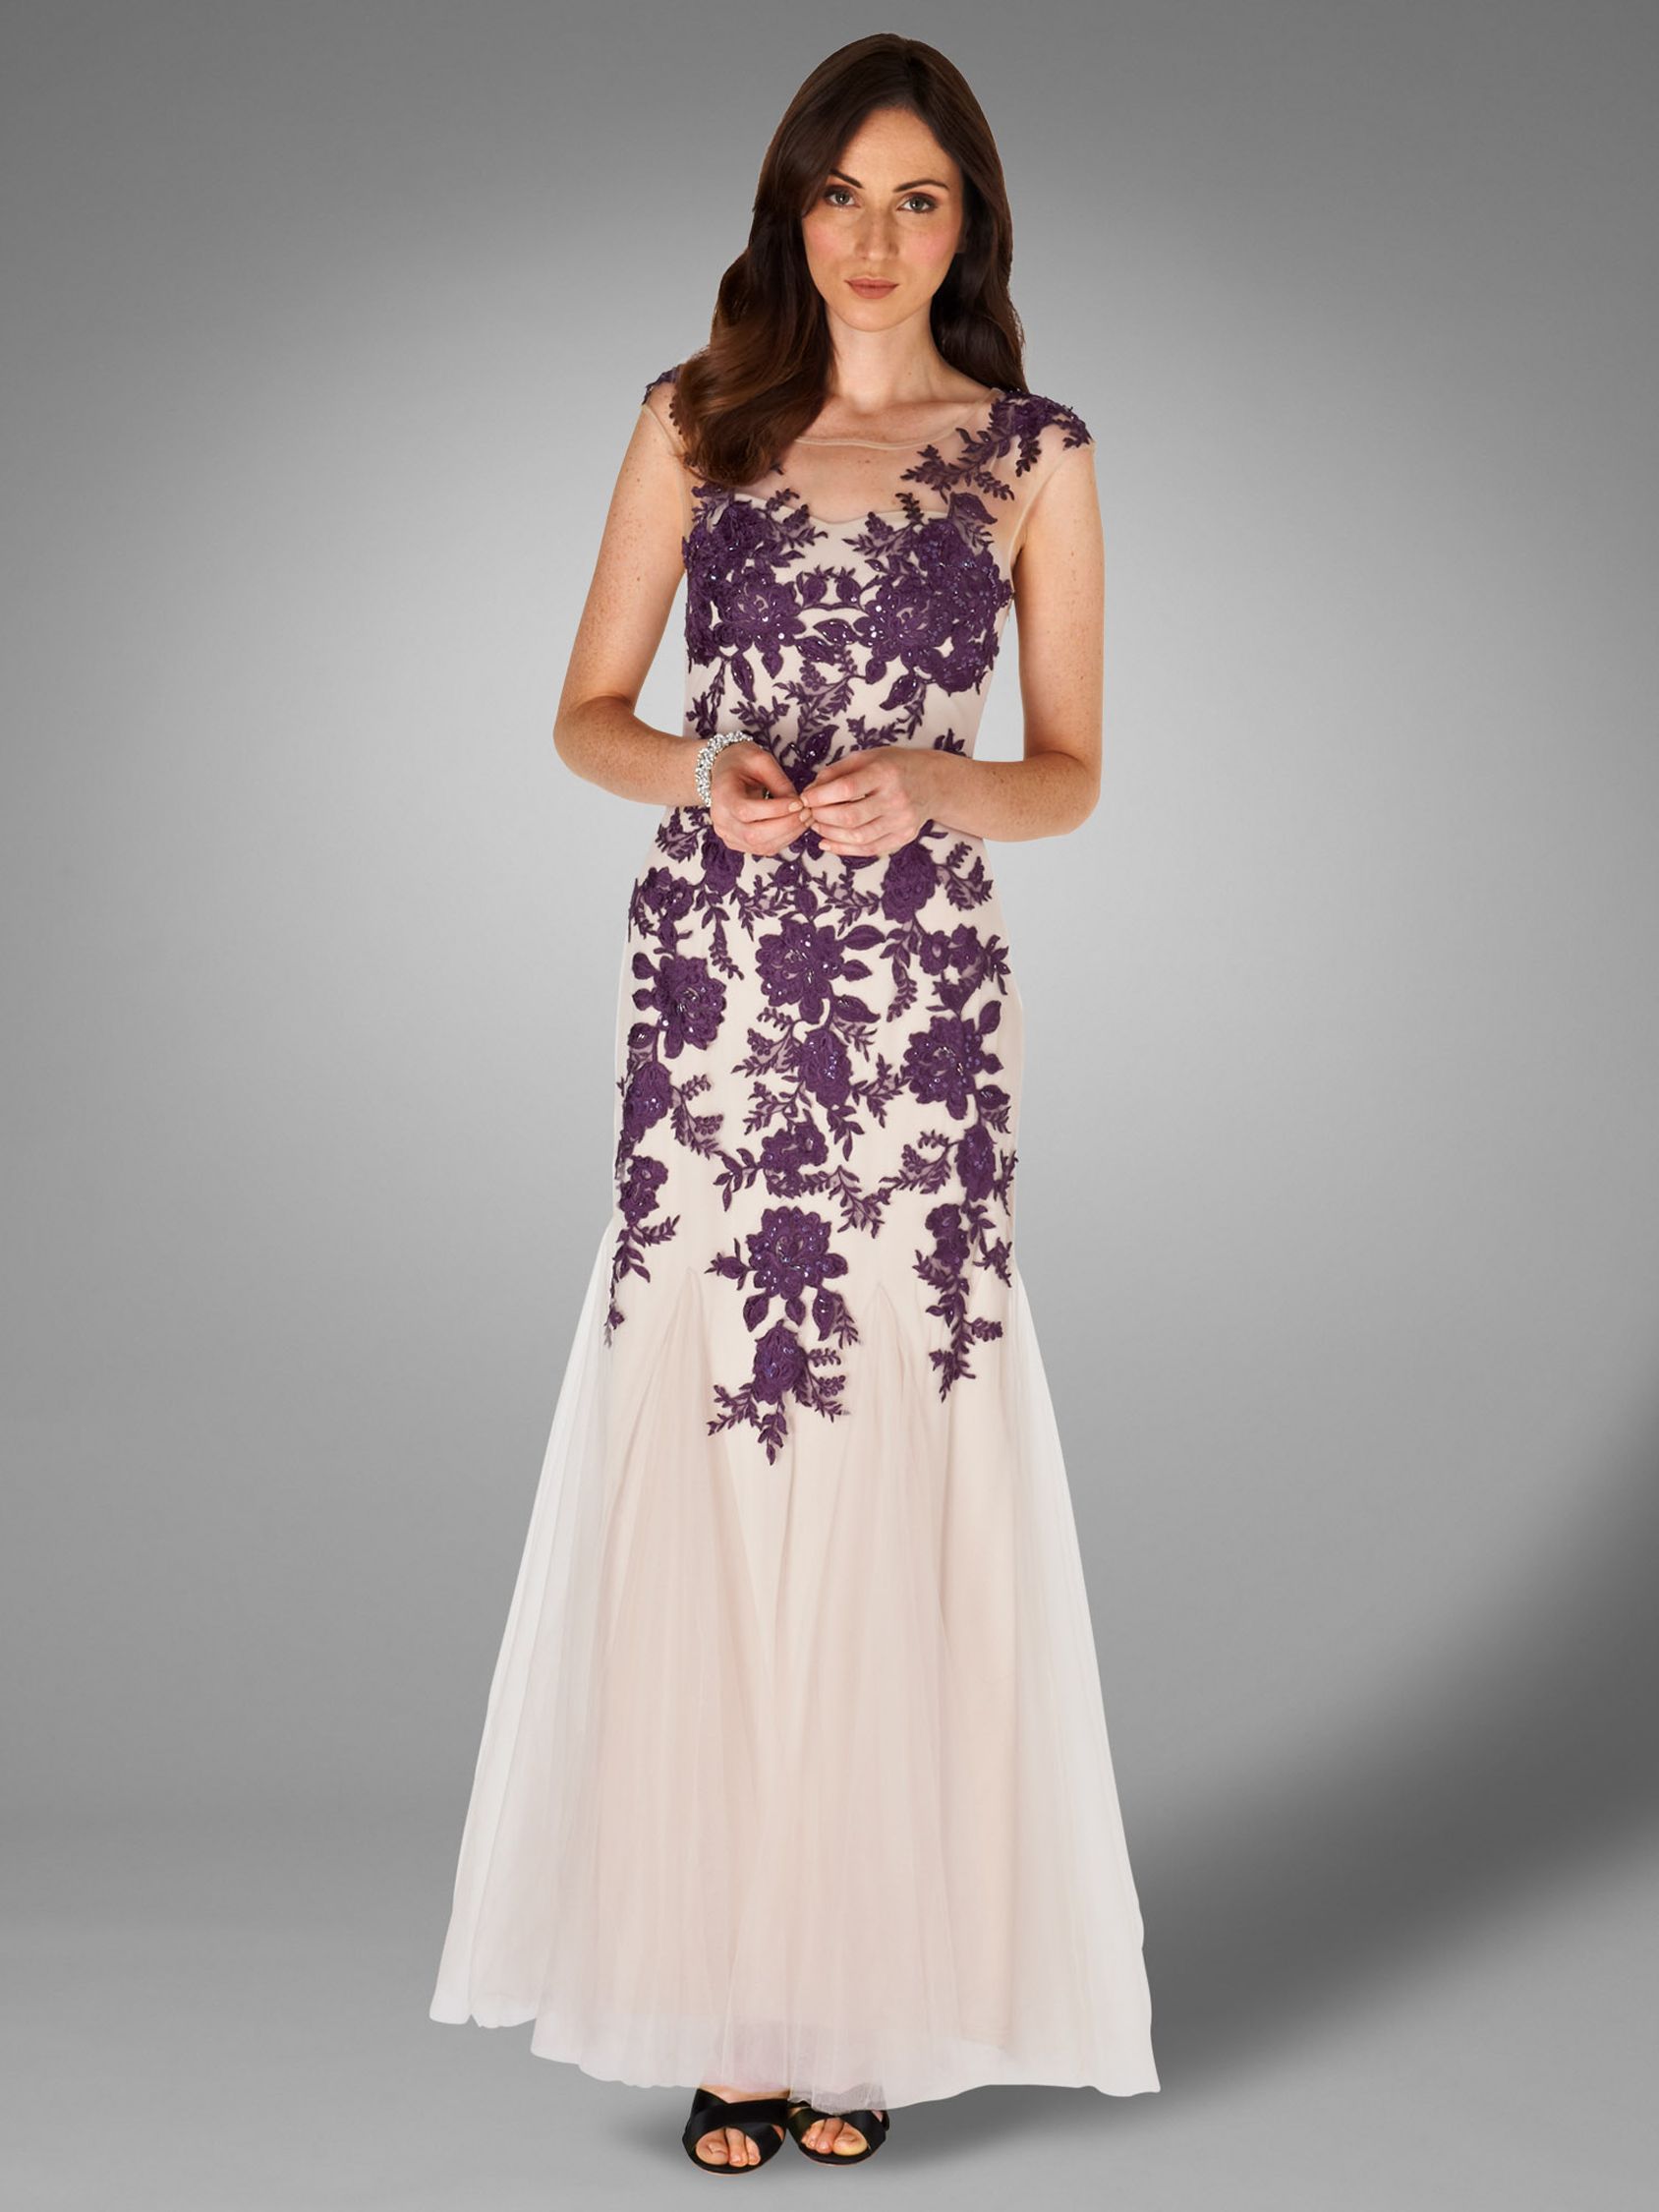 Phase Eight Collection 8 Rita Tulle Dress, Nude/Blackcurrant at John